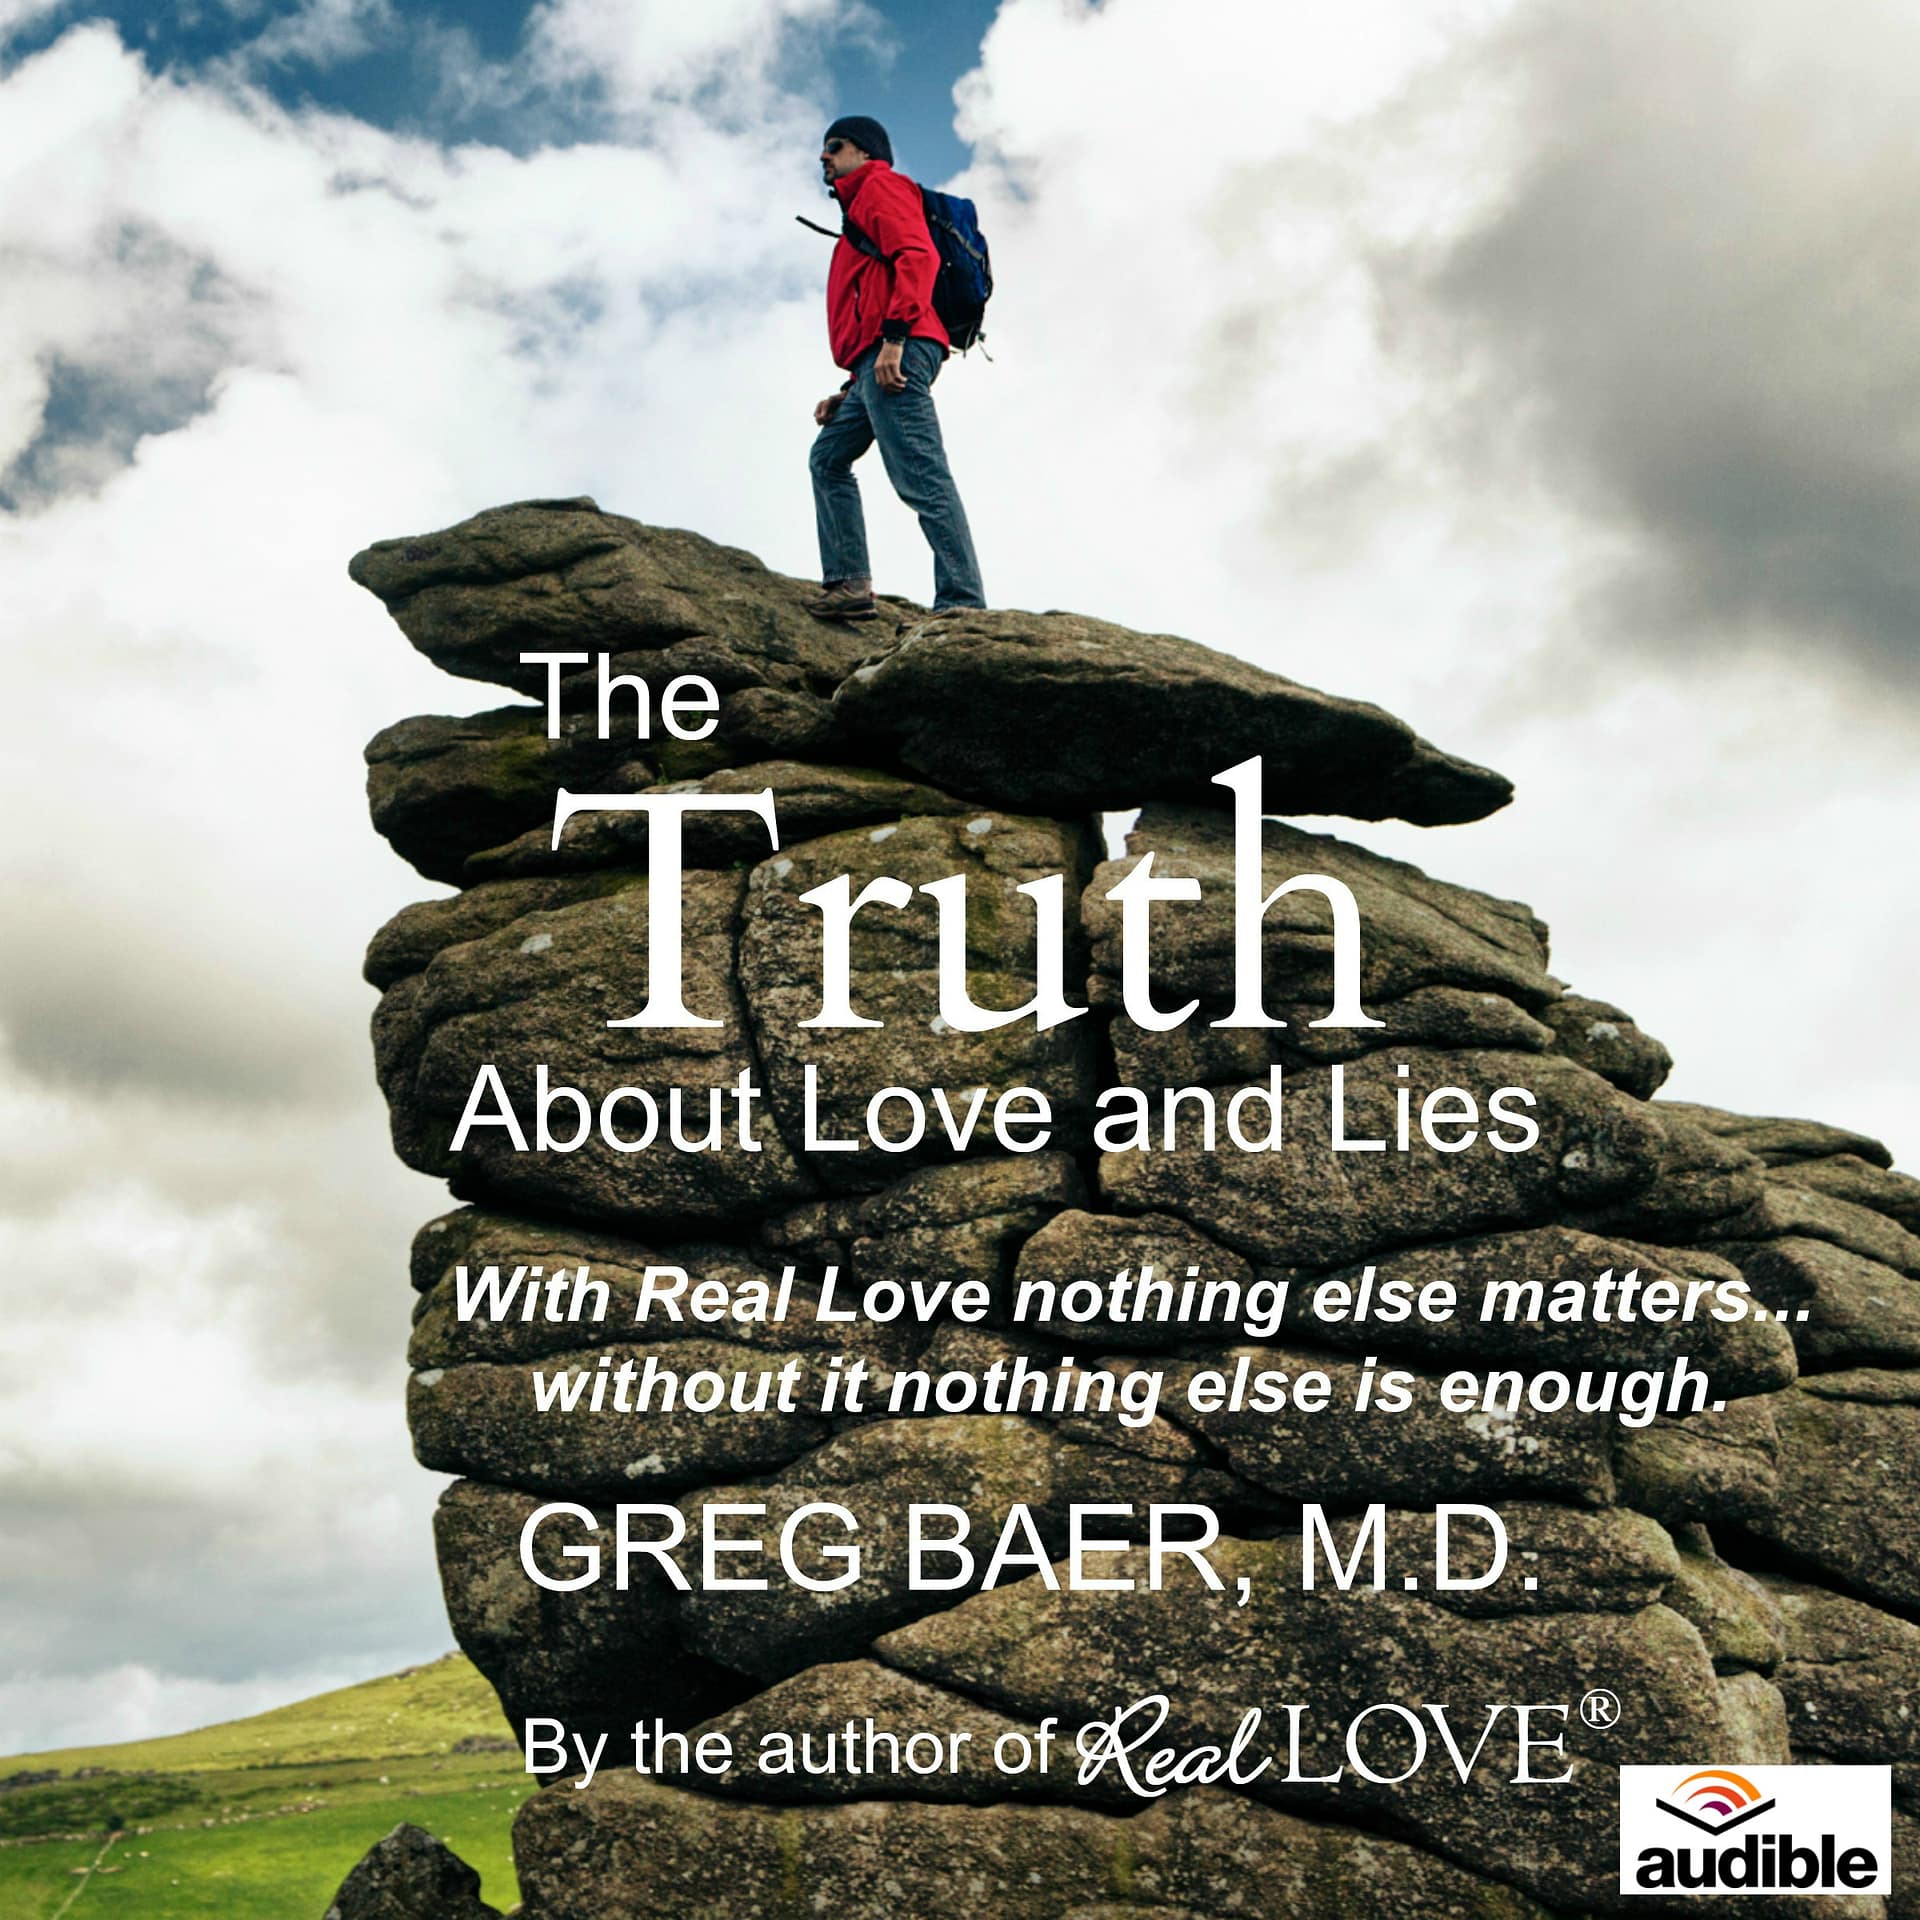 Cover of the Truth about love and lies